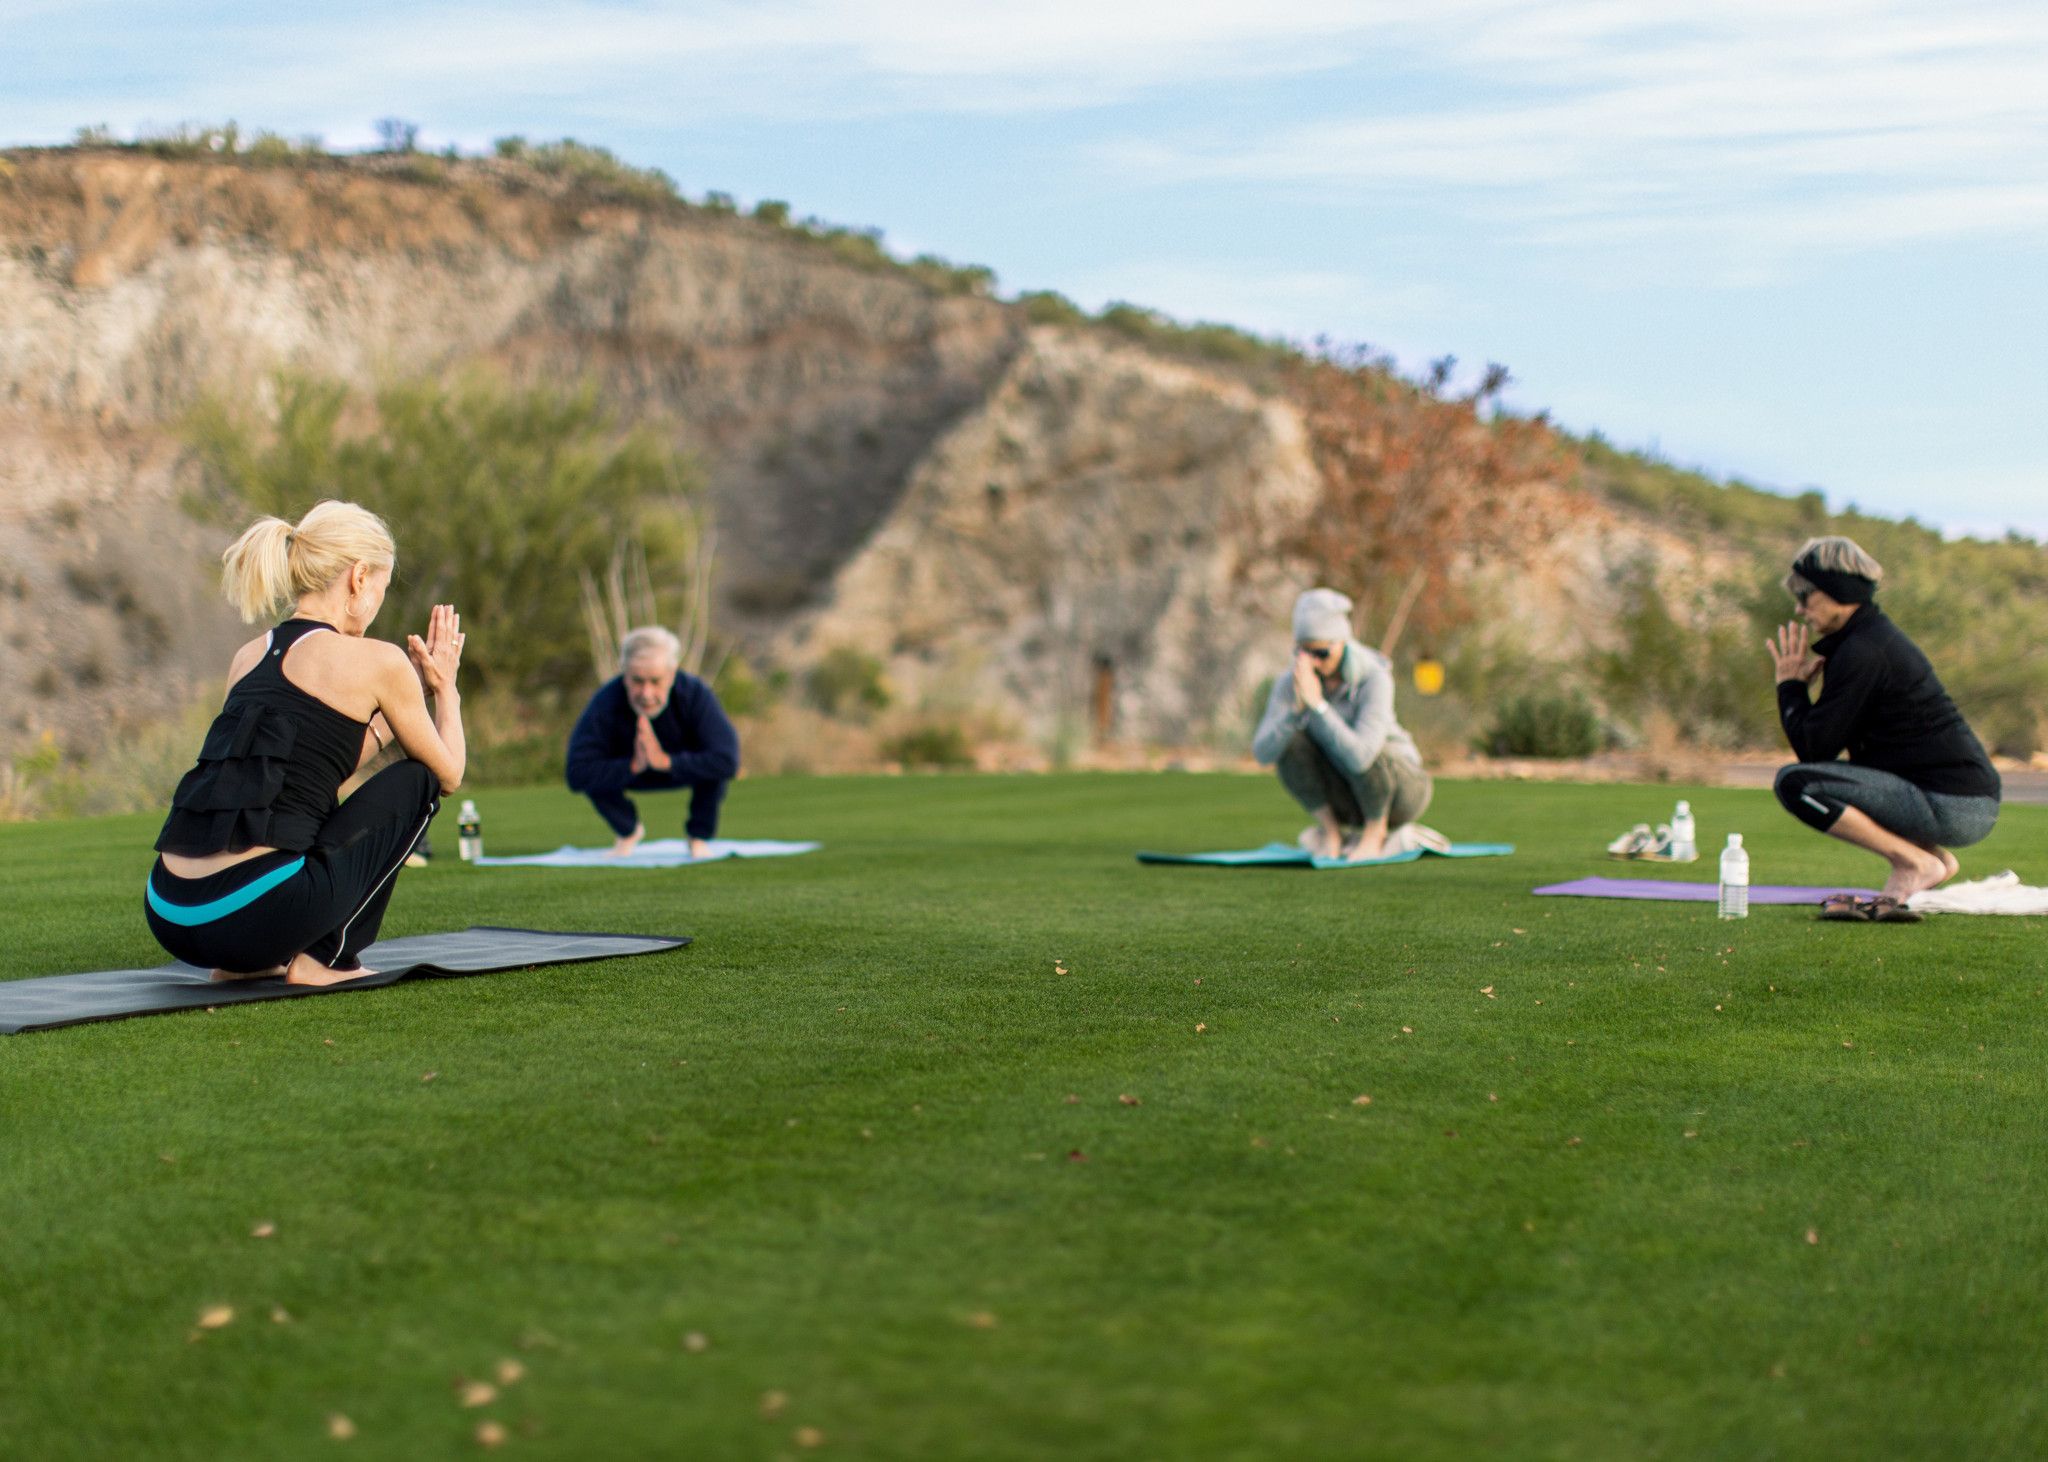 Homeowners at Yoga on the Lawn